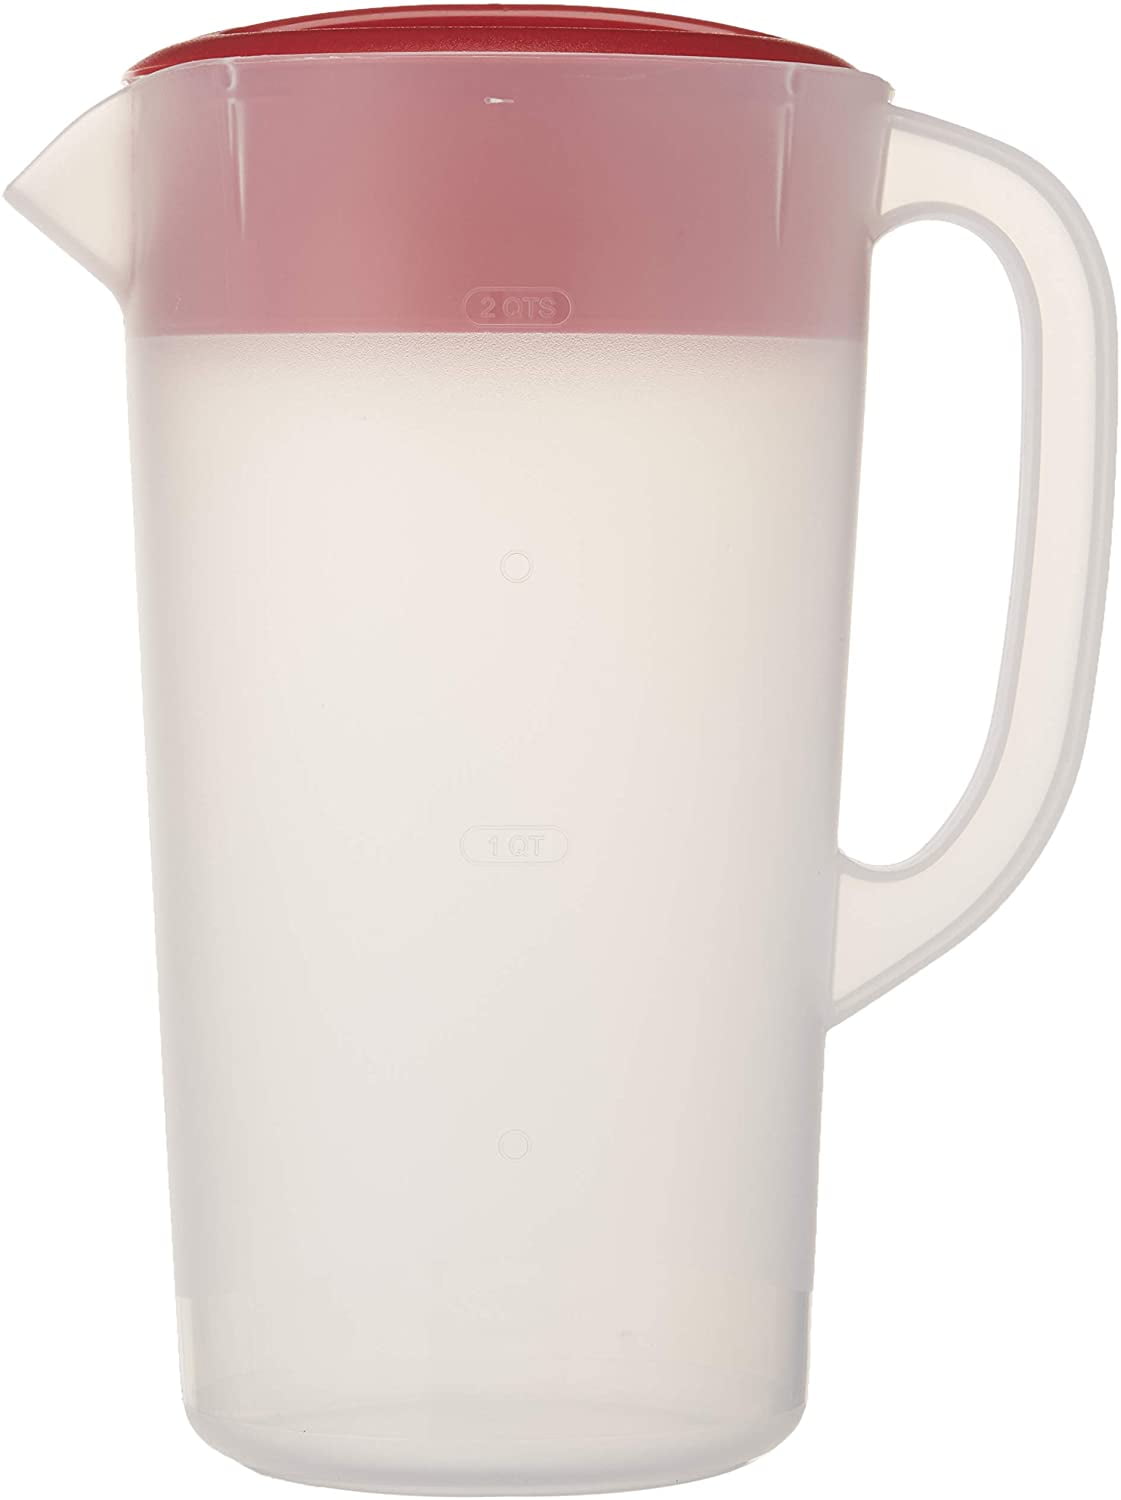 Renewed Rubbermaid 30621-4 712395881415 Pitcher 2.25 Qt-White with Red Cover Pack of 6 6 Pack 